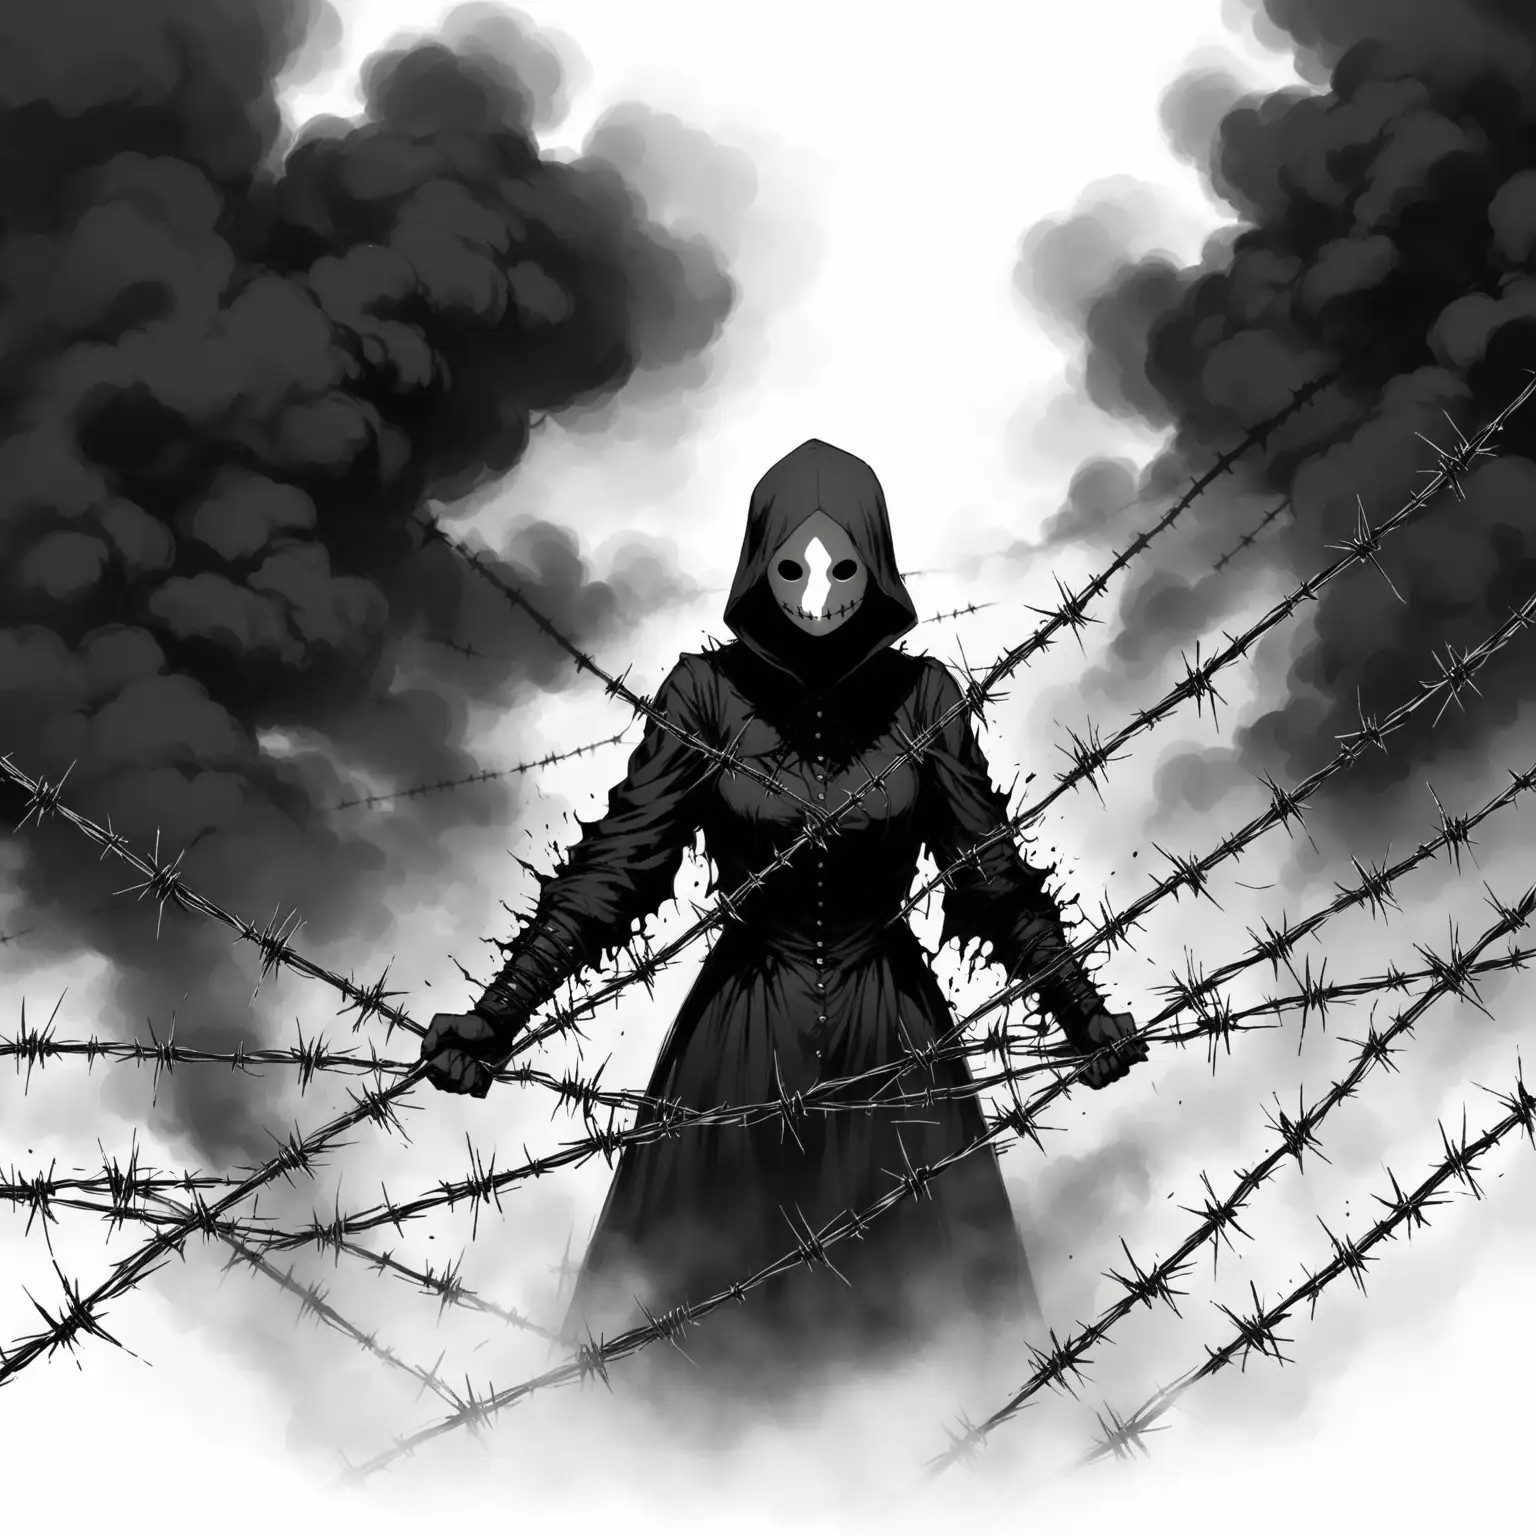 Gothic Figure Battles Barbed Wires Amidst Black Smoke